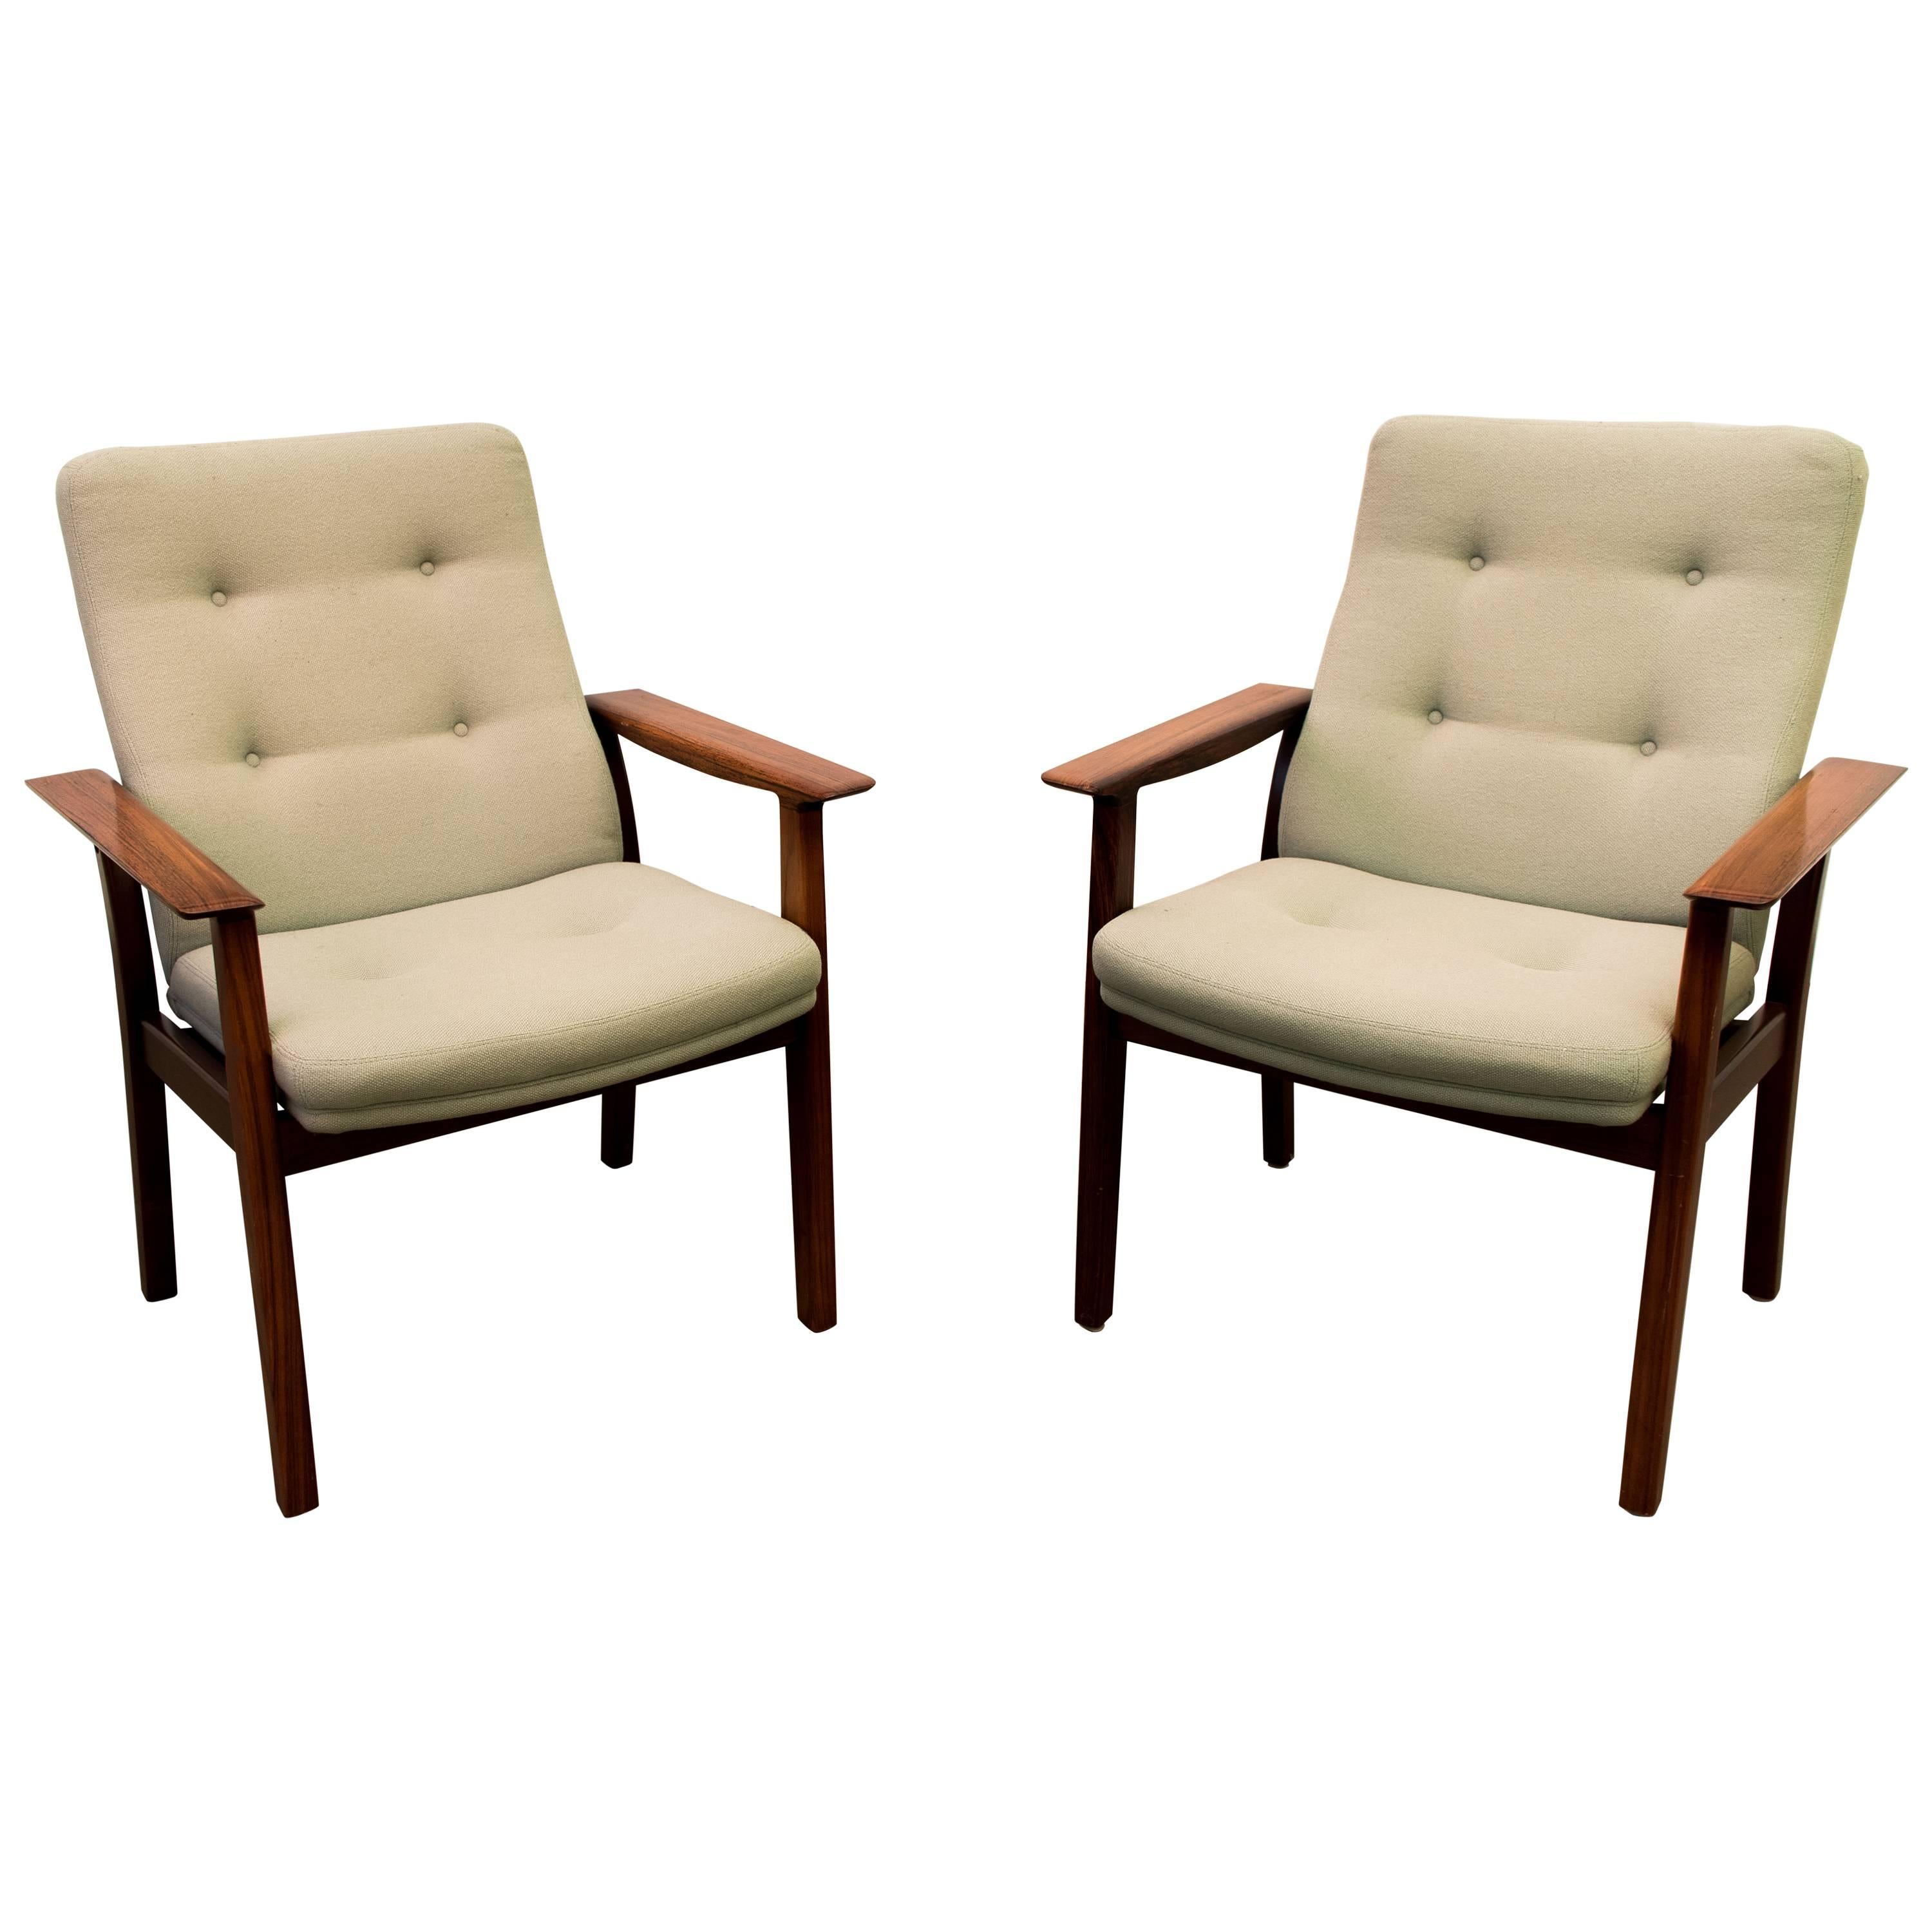 Pair of Mid-Century Modern Cream Fabric and Rosewood Armchairs, 1960s